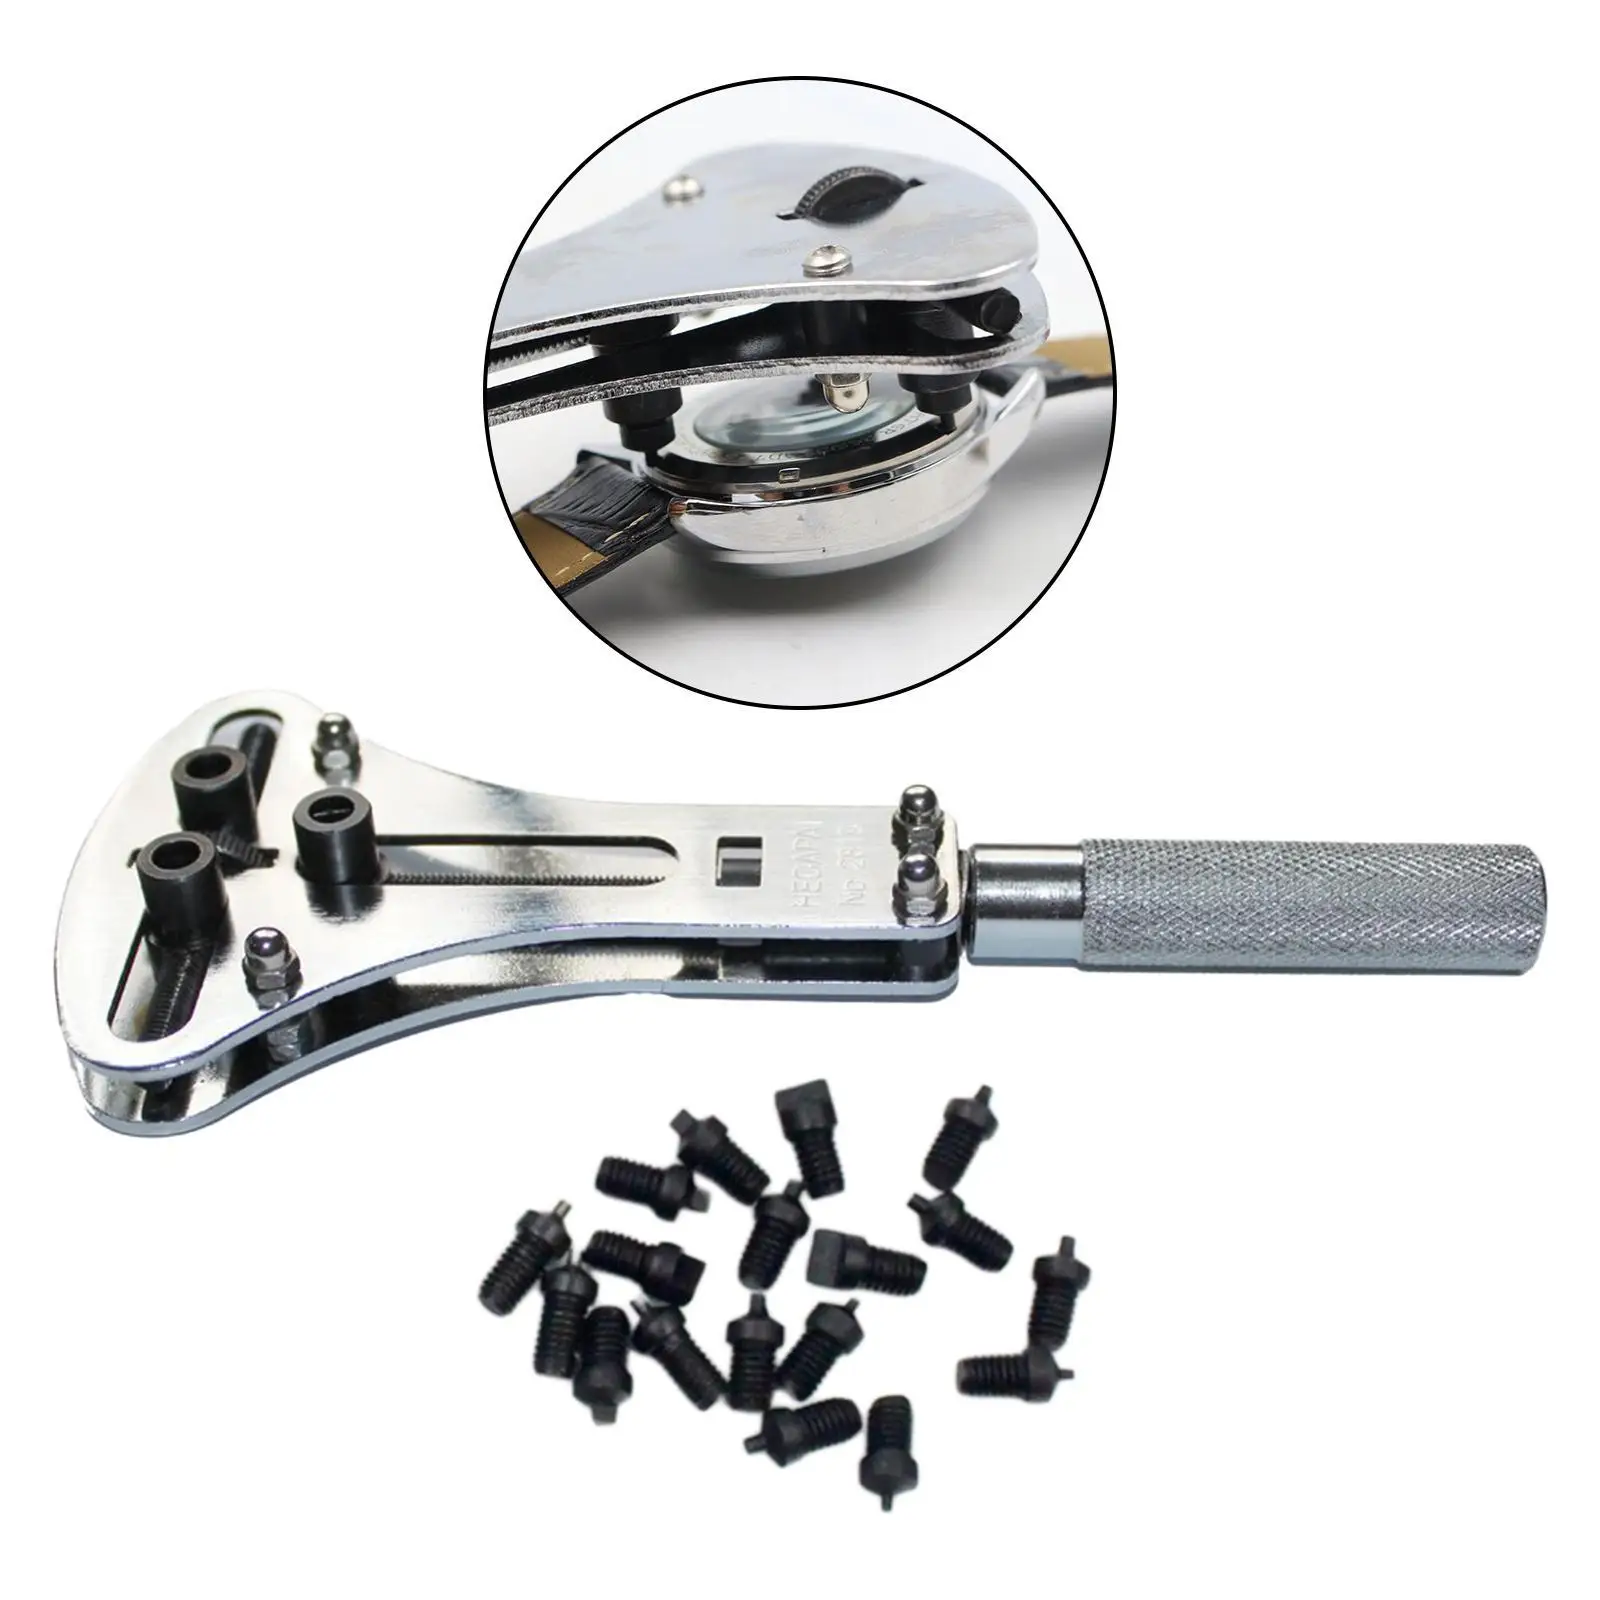 Adjustable Watch  Case Wrench Opener Remover Repair Tool with Replaceable Parts